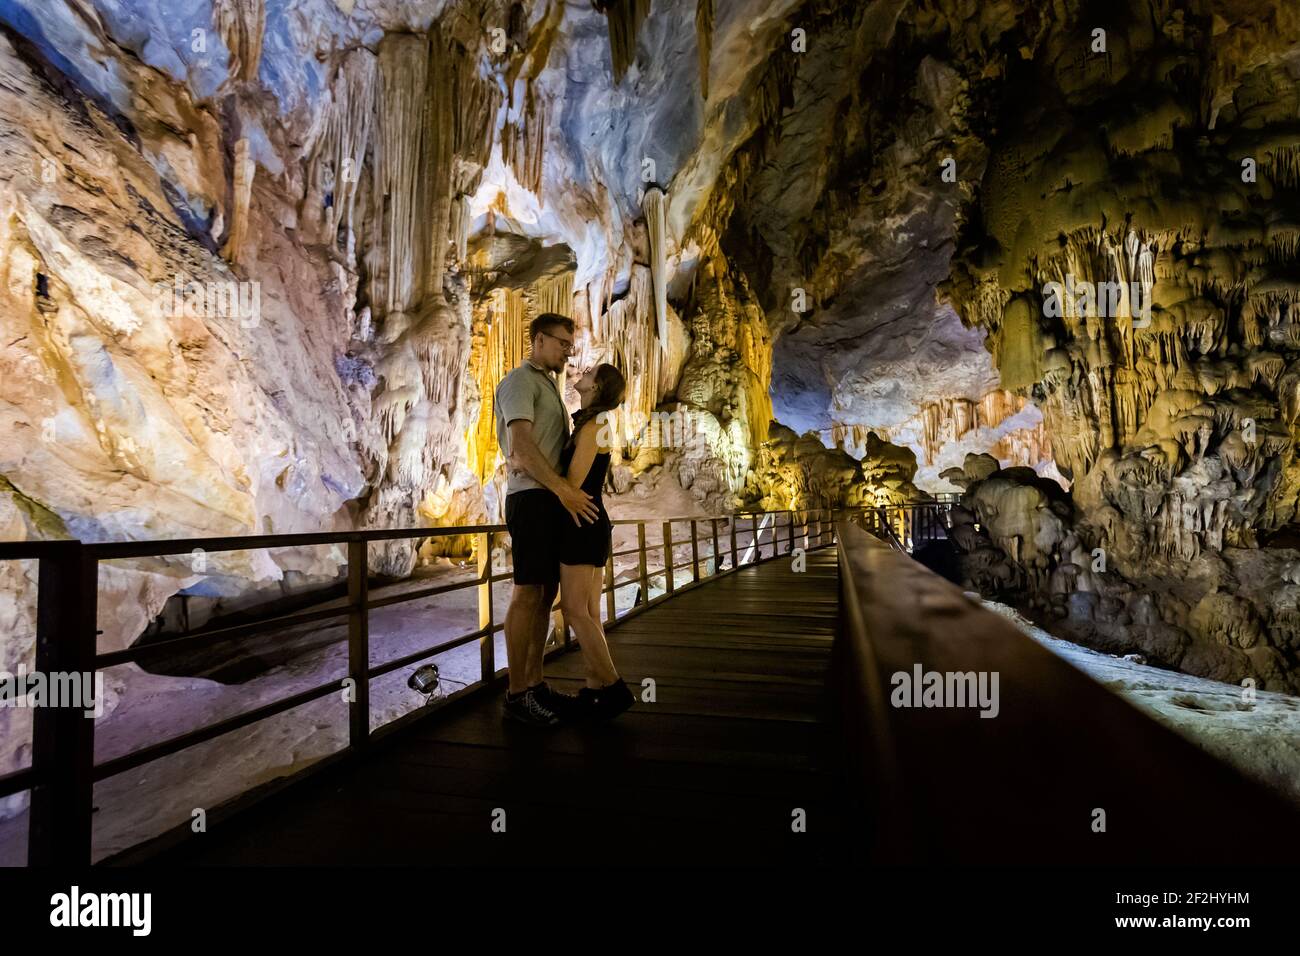 Happy married couple in Paradise Cave close to touristic Phong Nha in Vietnam. Underground rock formation photo taken in south east Asia. Stock Photo